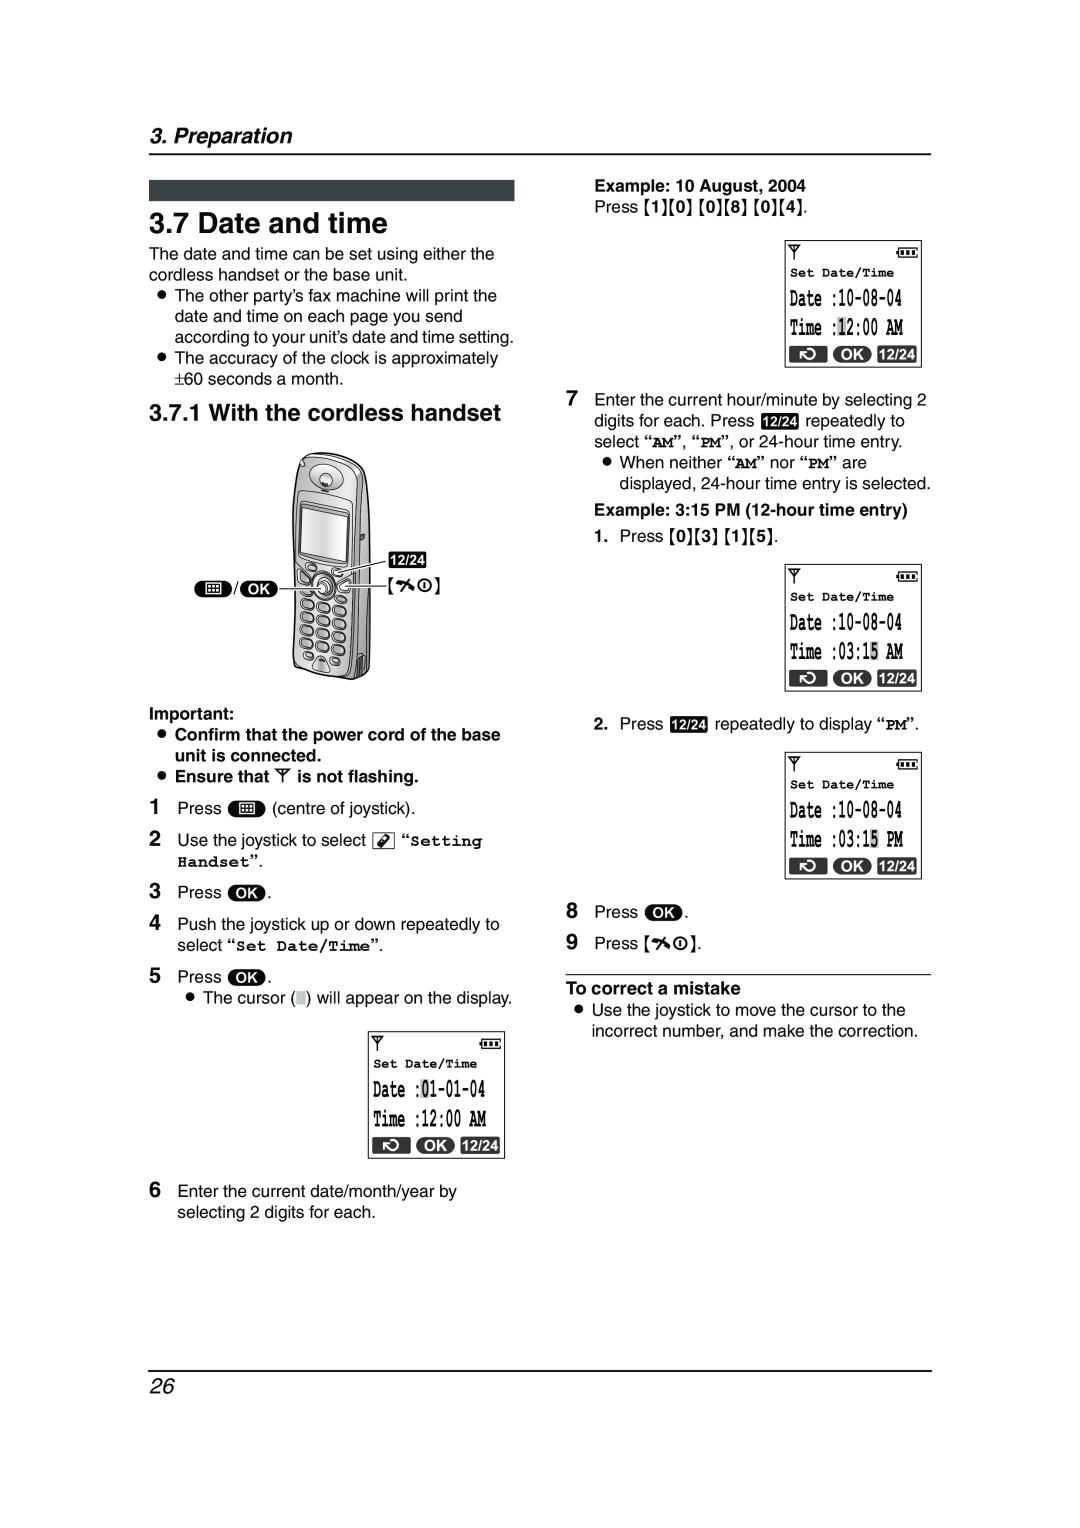 Panasonic KX-FC241AL Date and time, With the cordless handset, Example 10 August, Example 315 PM 12-hour time entry, 200AM 